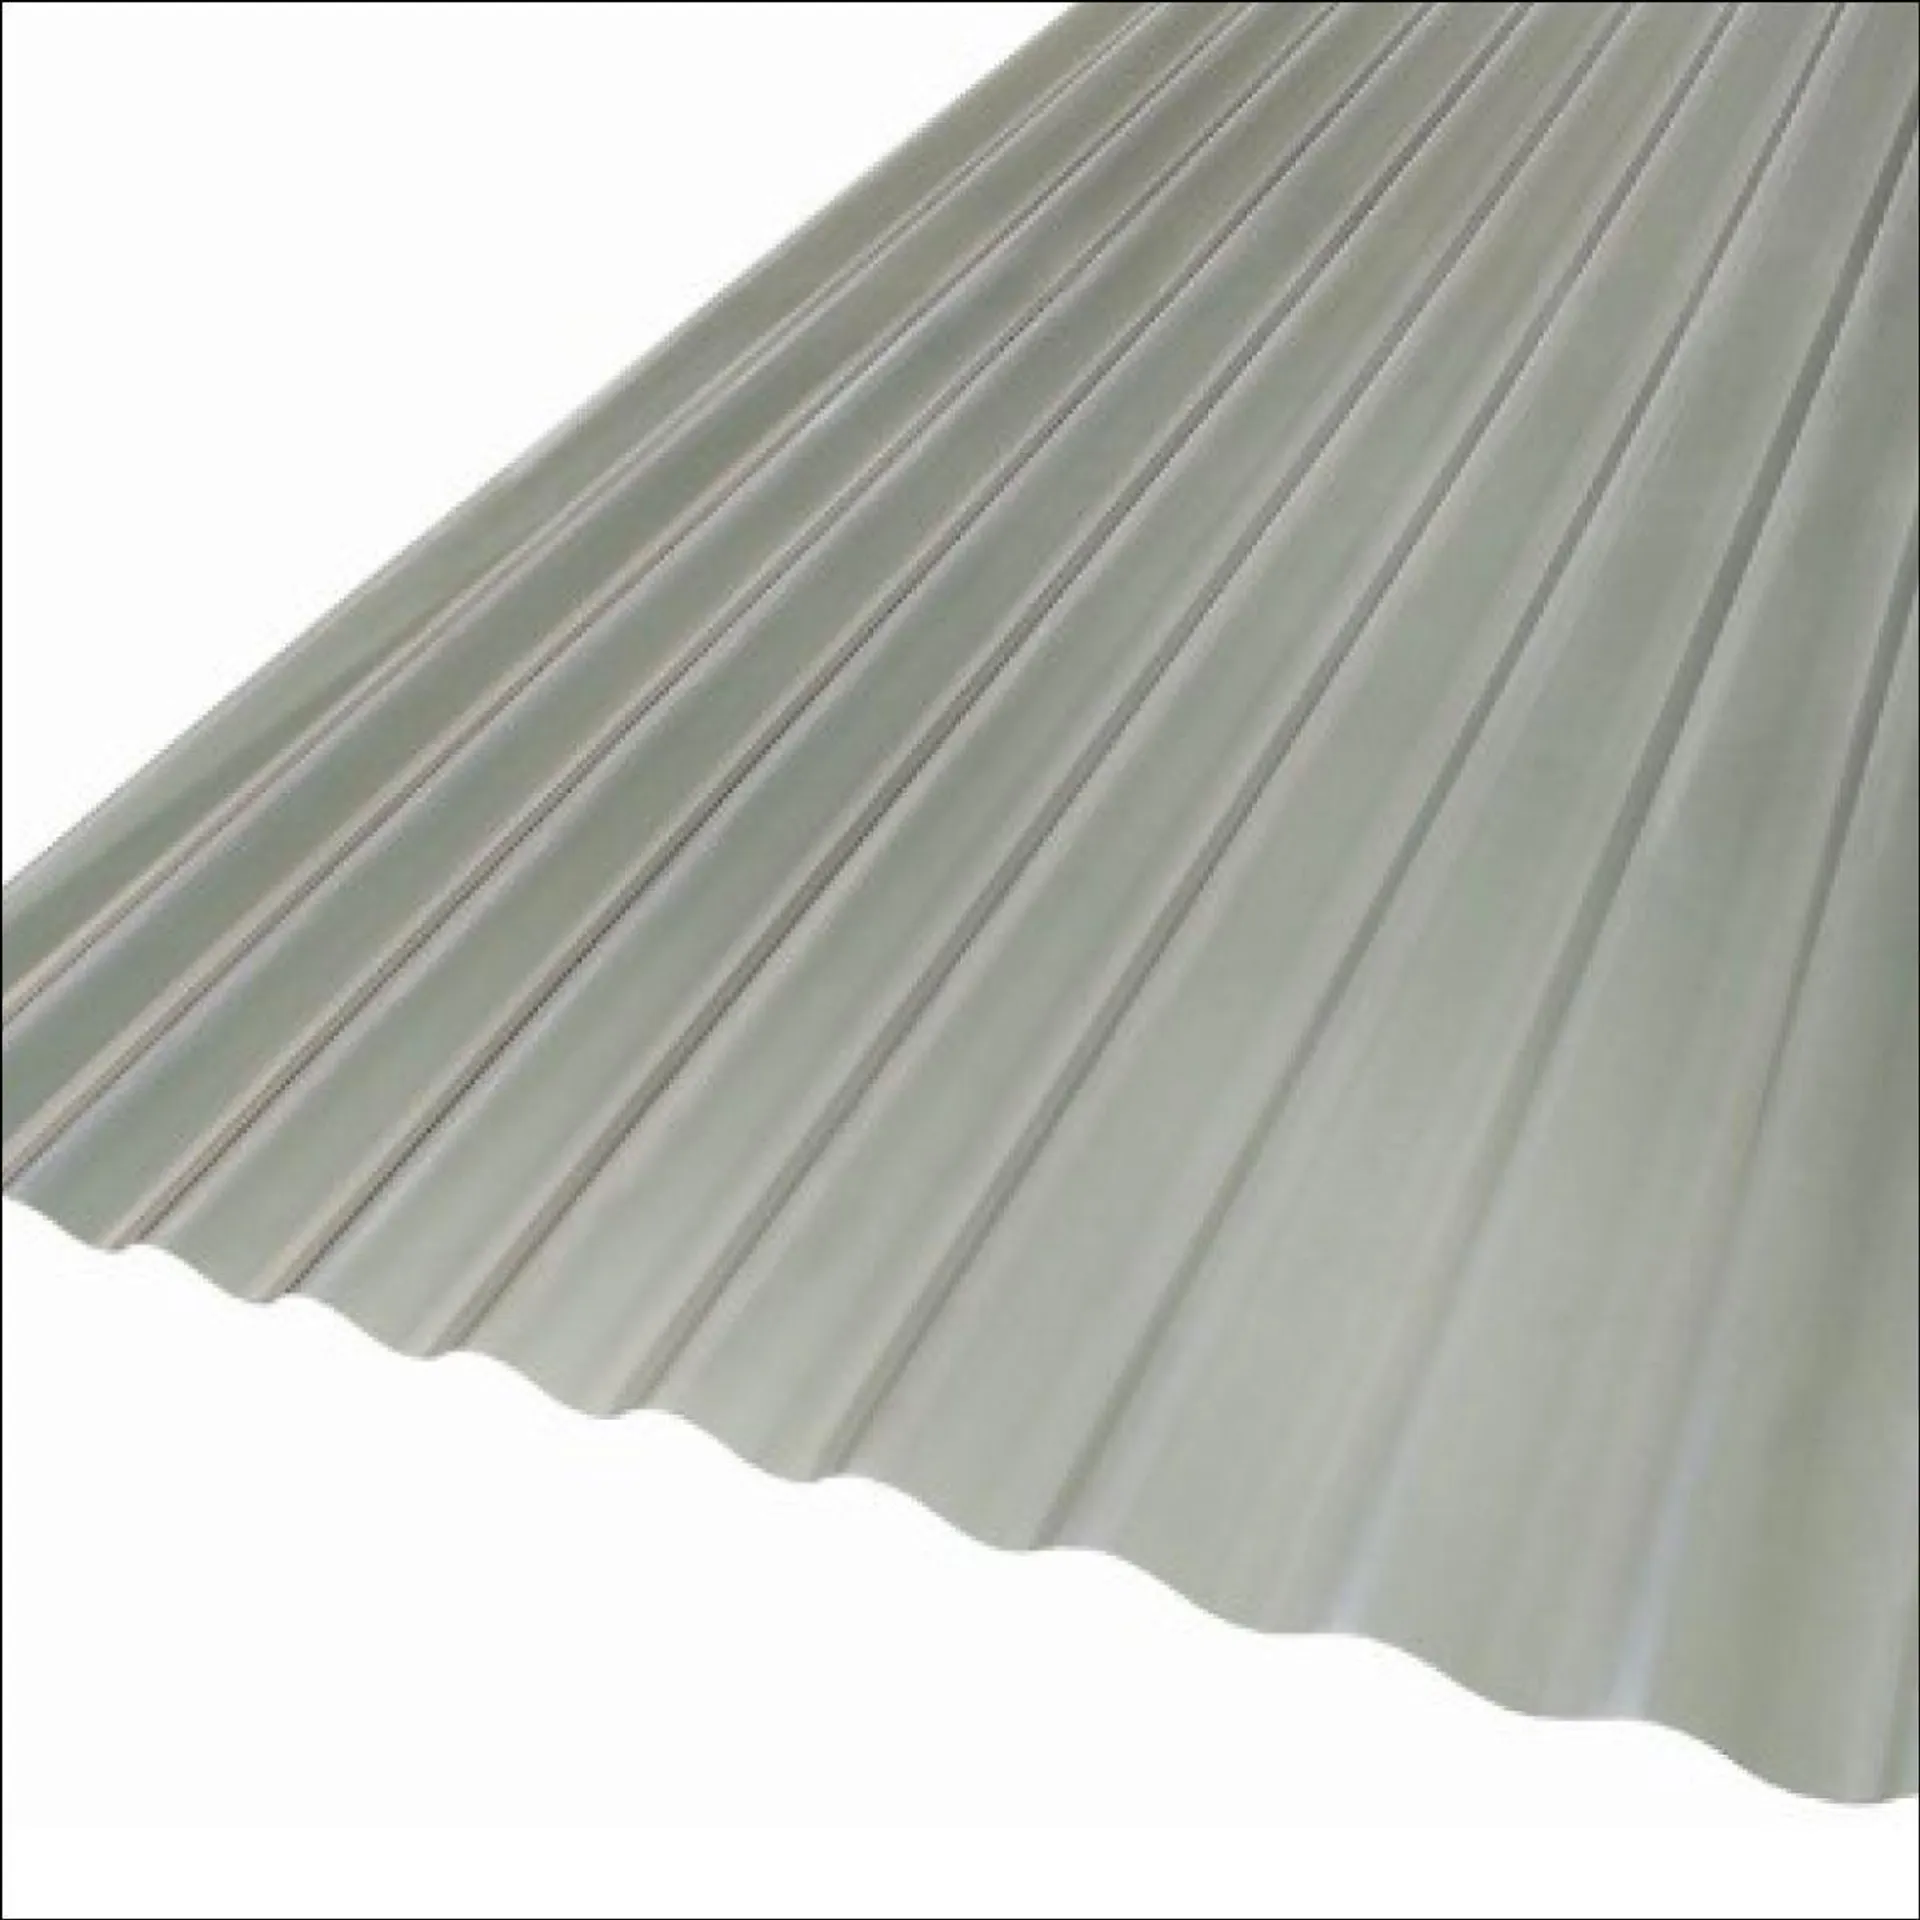 CoolTech Corrugated Roofing Sheet Grey 1800 x 860mm